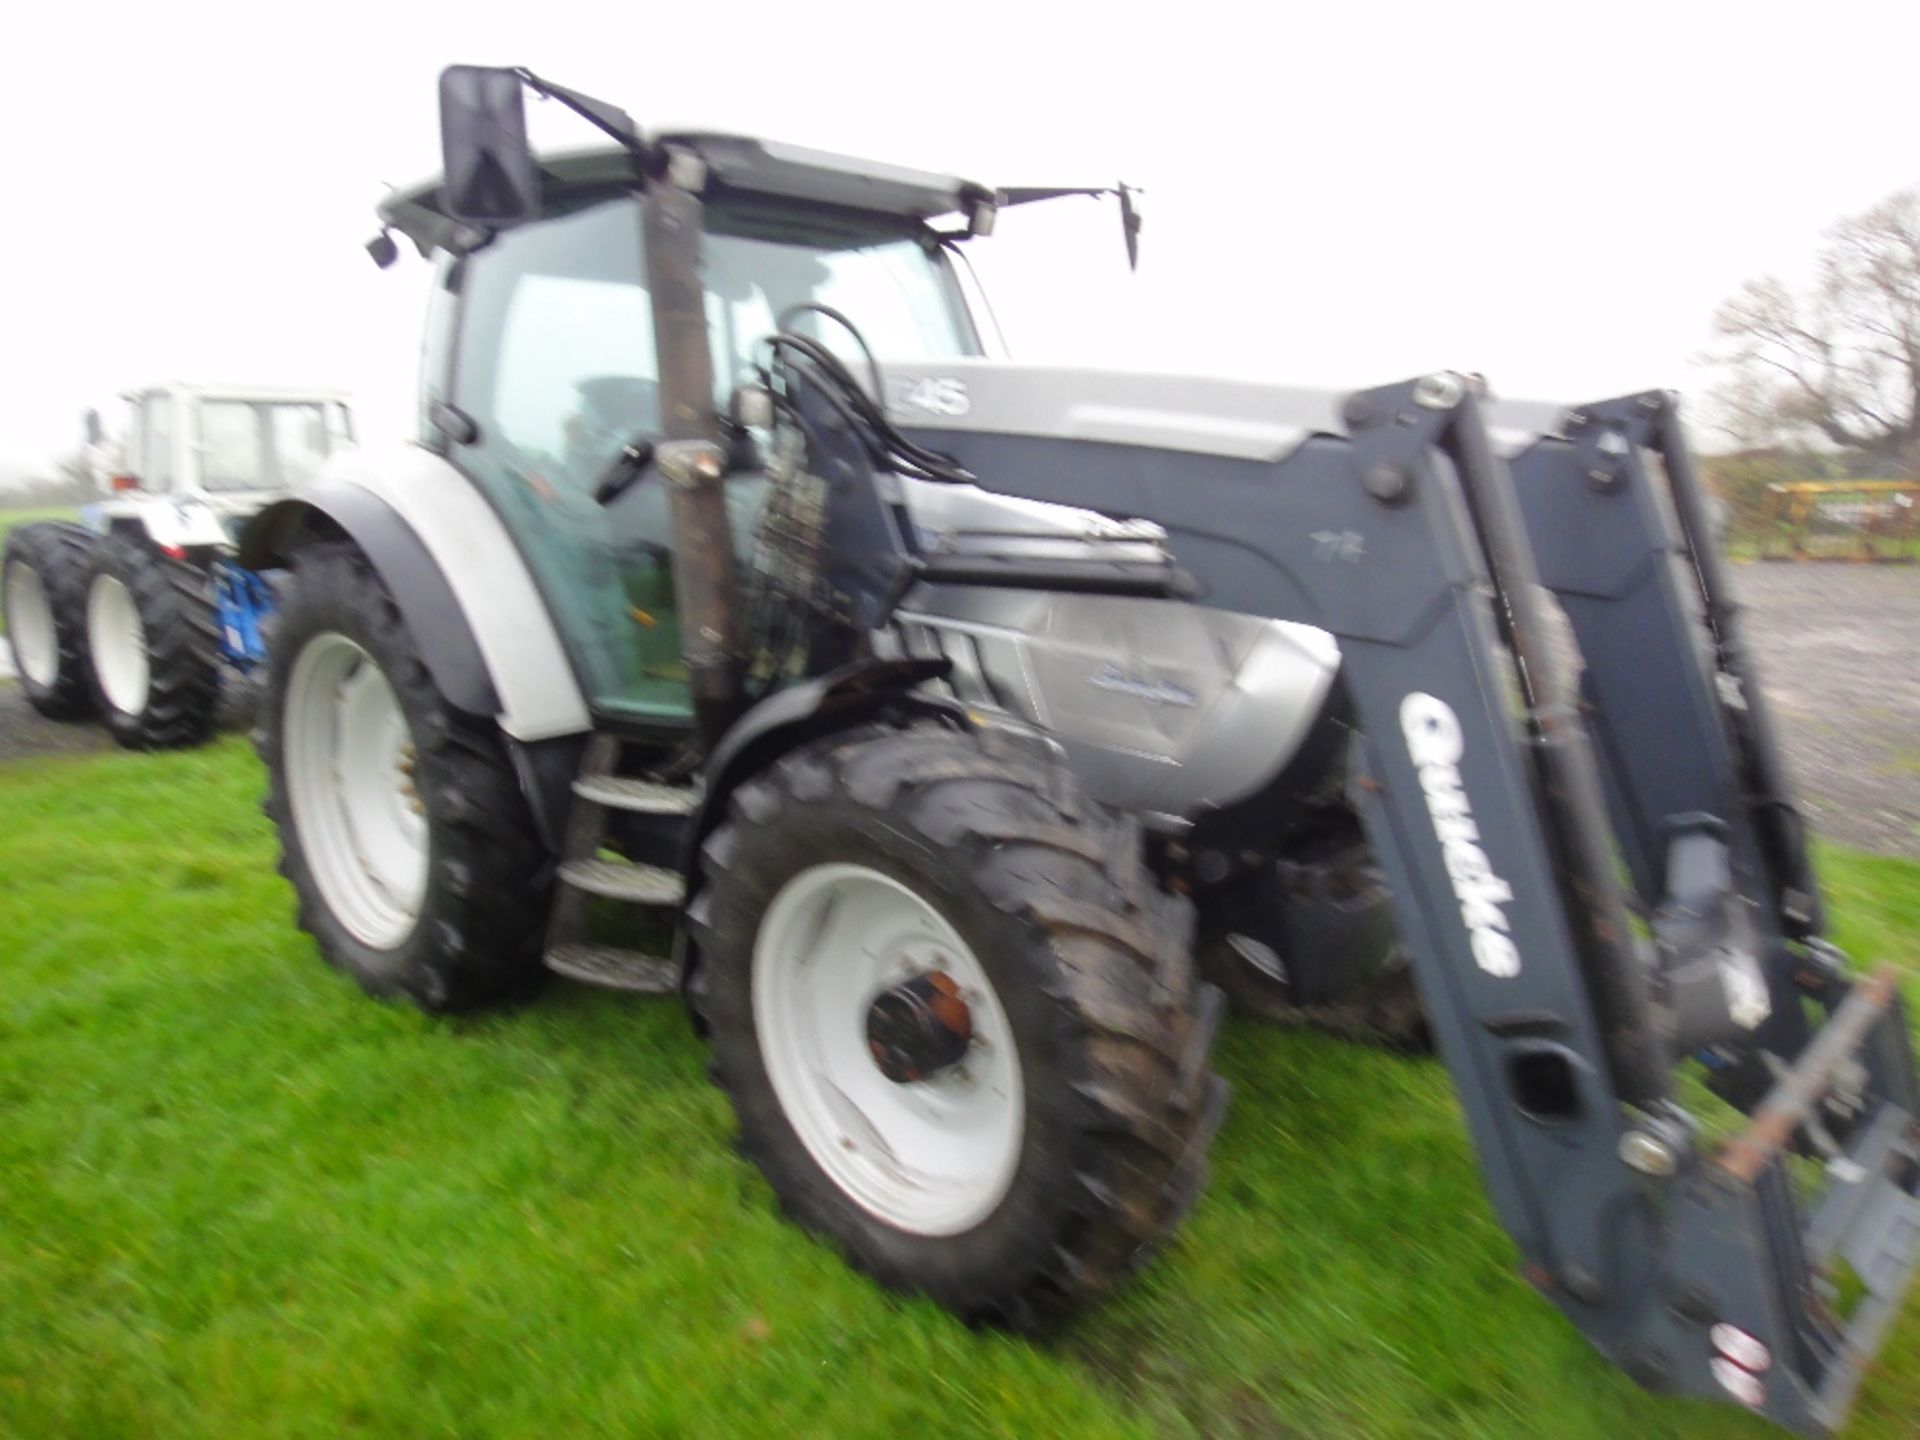 2007 Lamborghini R6120 4wd Tractor with Quickie Q45 Loader. V5 will be supplied - Image 3 of 7